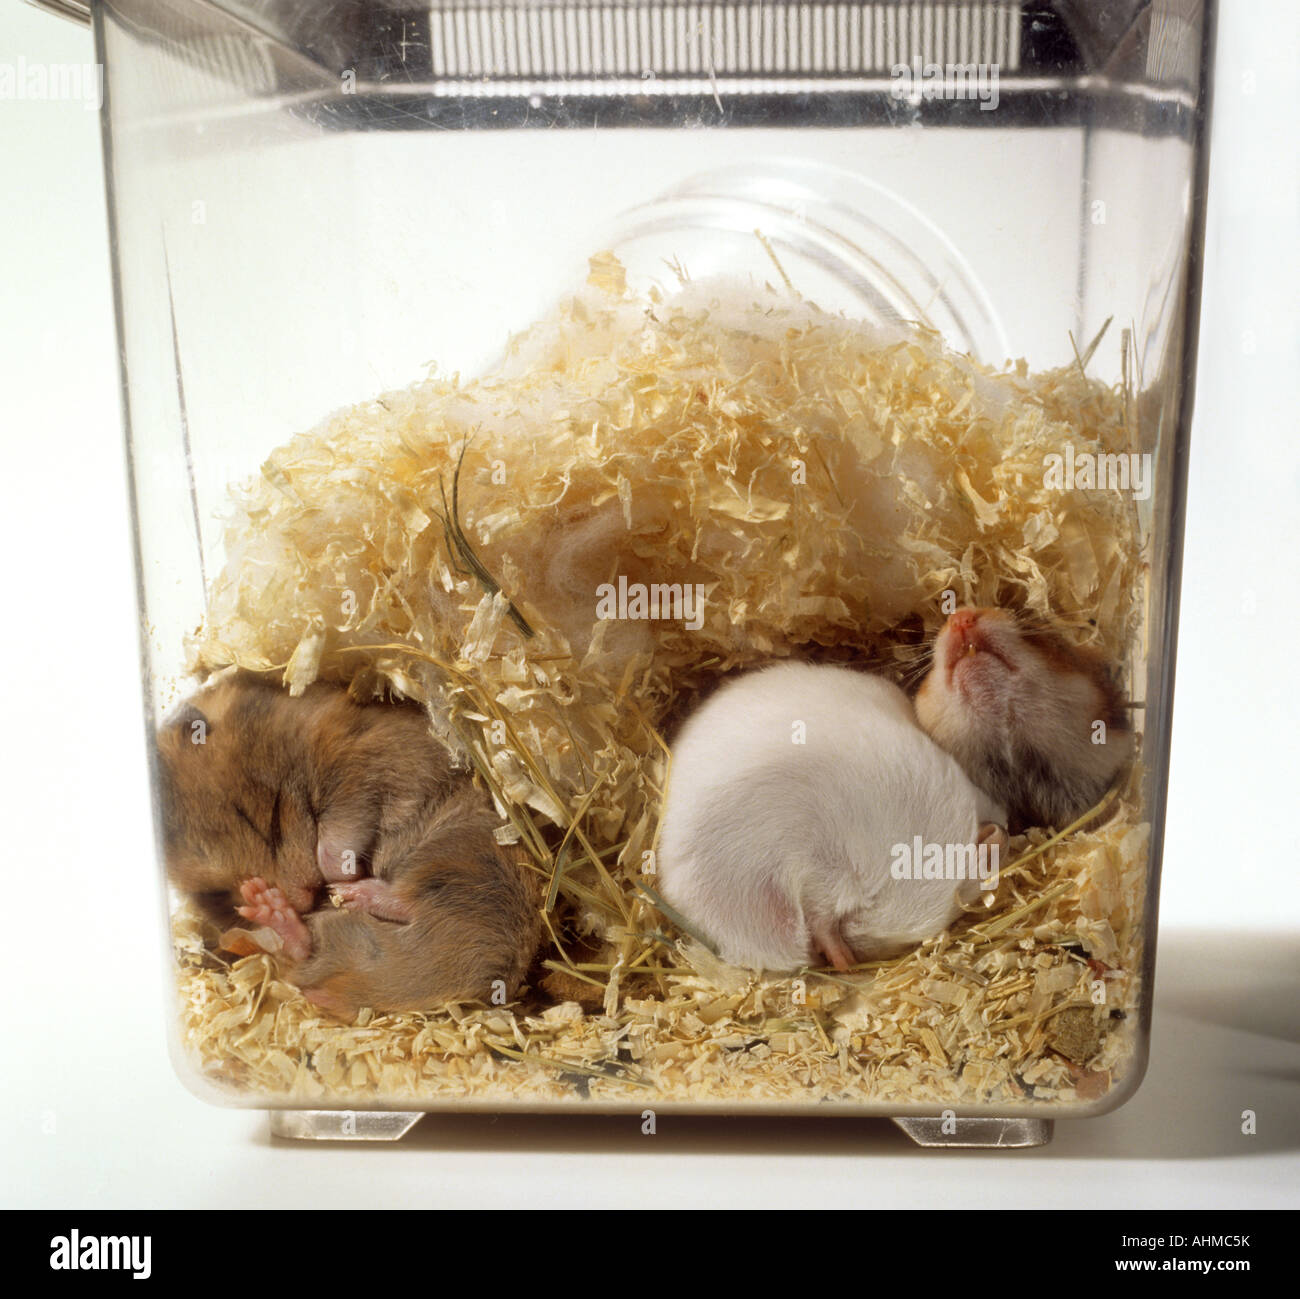 Hamsters Sleeping High Resolution Stock Photography and Images - Alamy